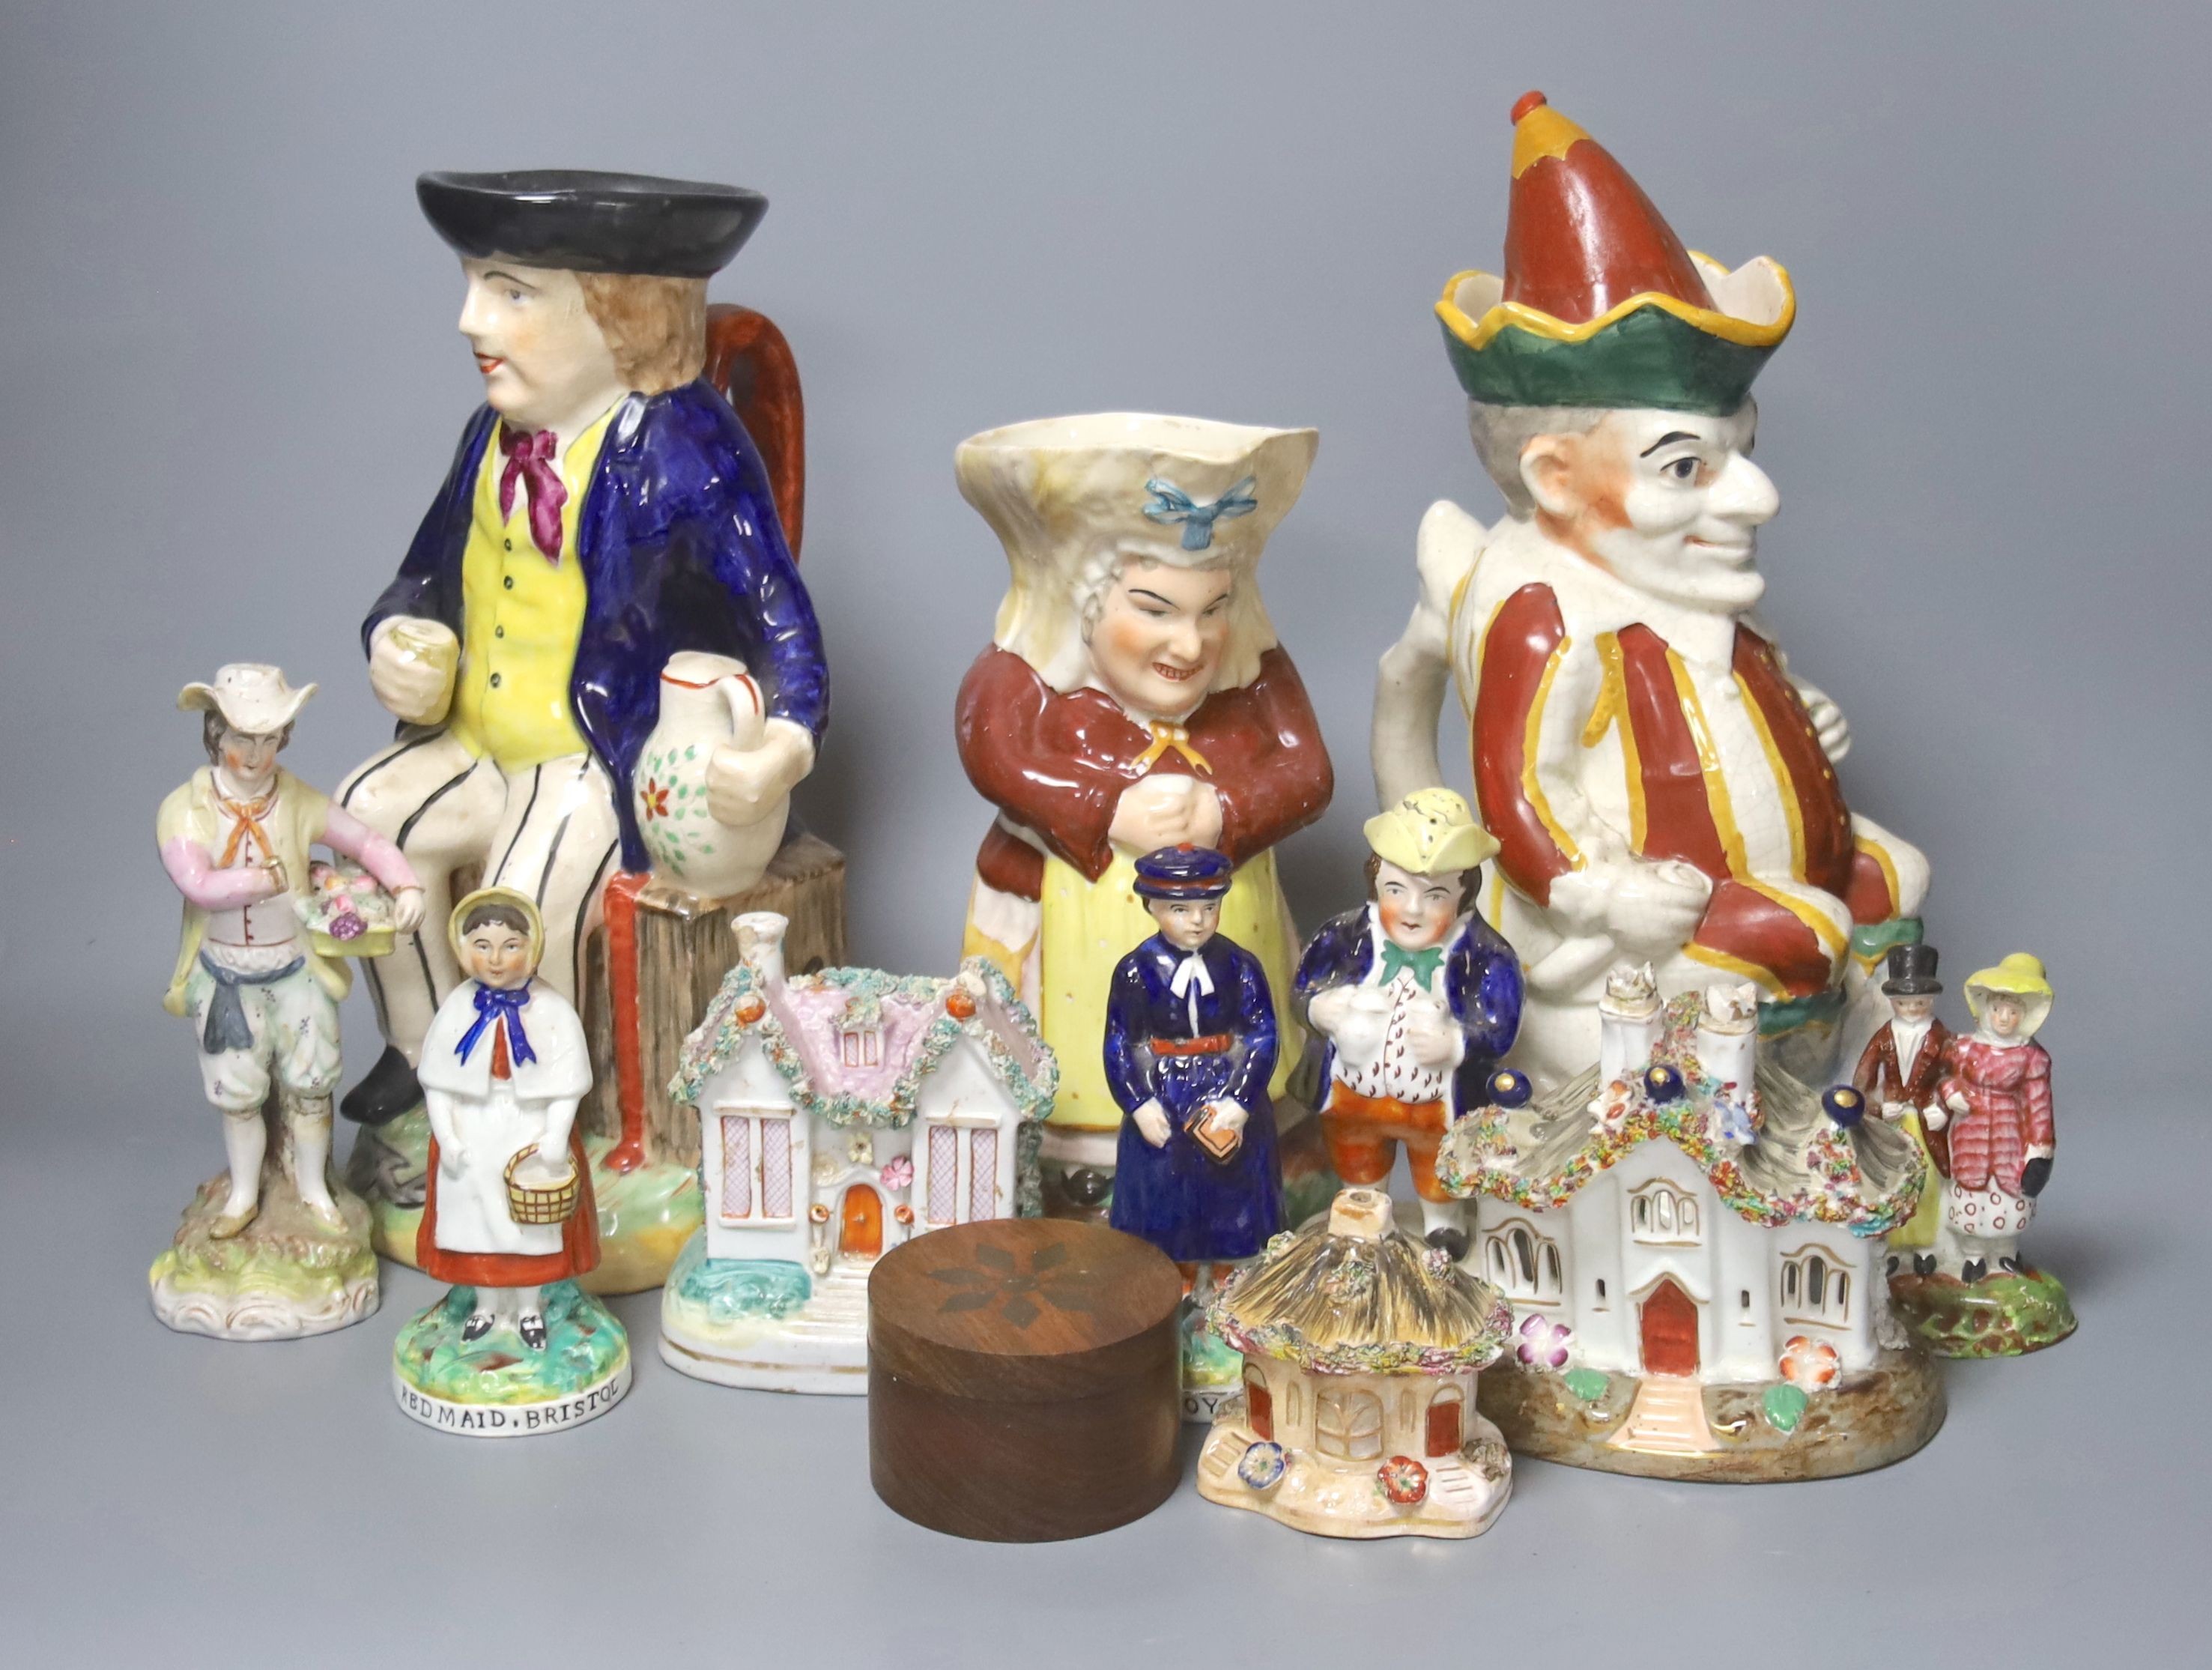 A group of assorted 19th century and later Staffordshire ceramics including a Toby jug, Colston Boy and Red Maid Girl Bristol